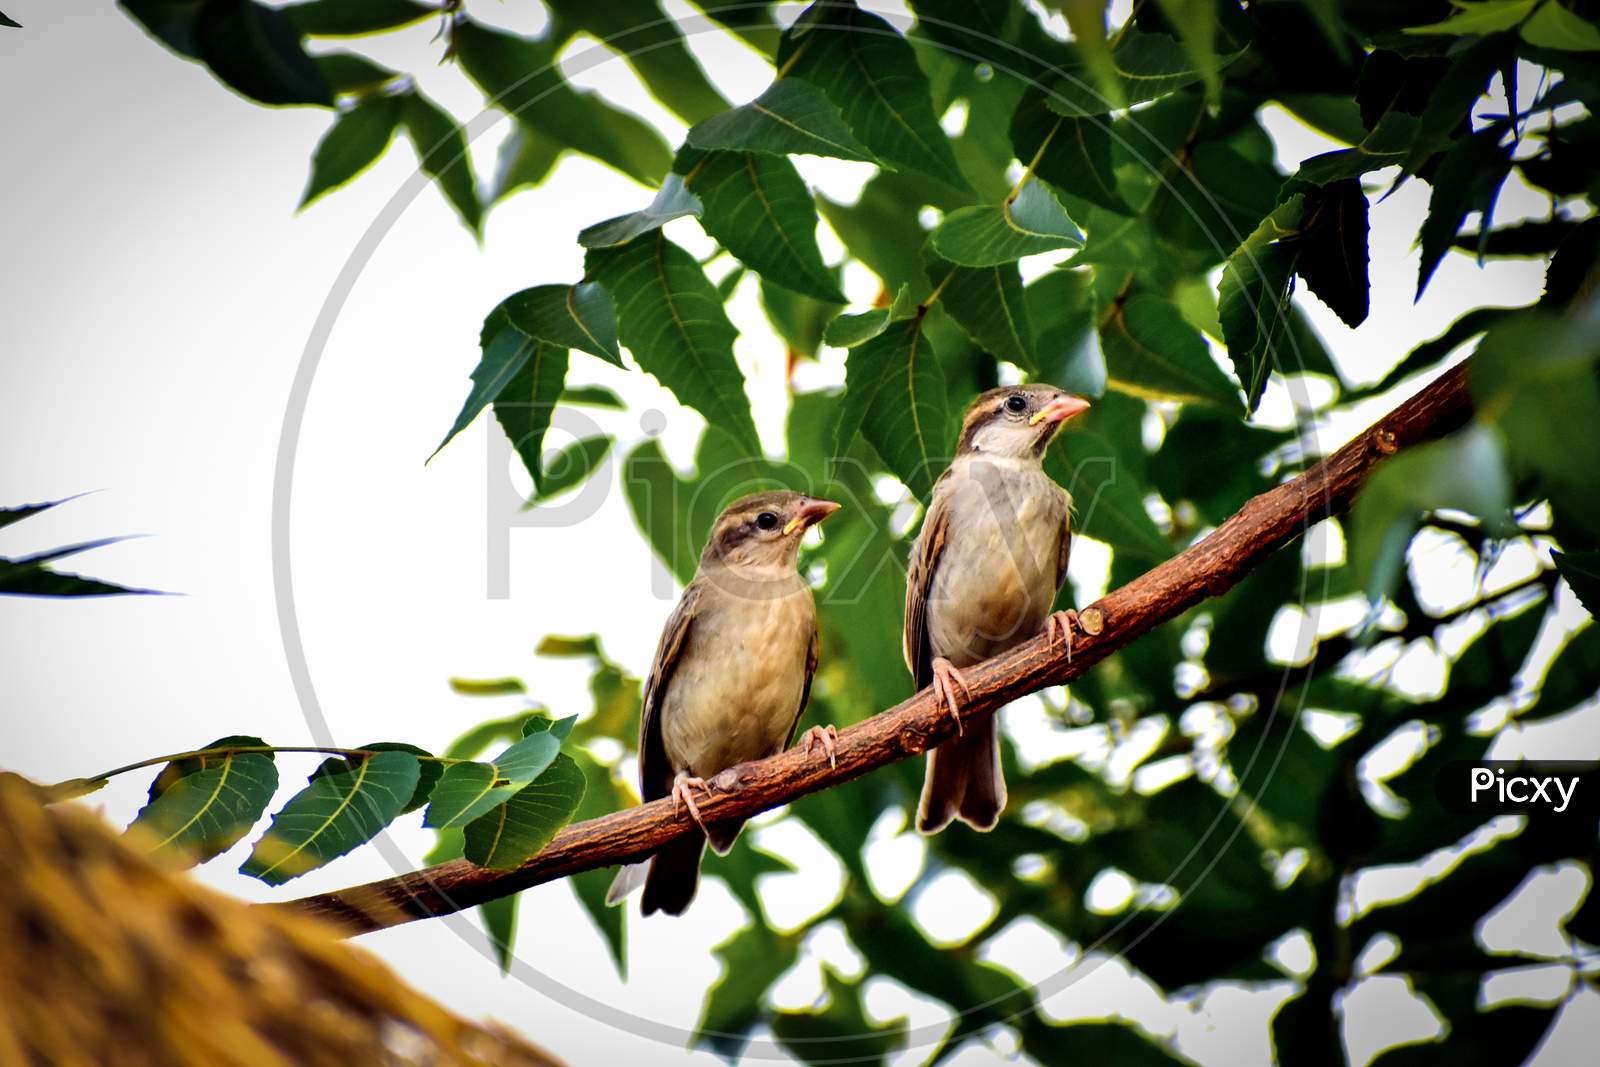 Two sparrows sitting branch looking at something